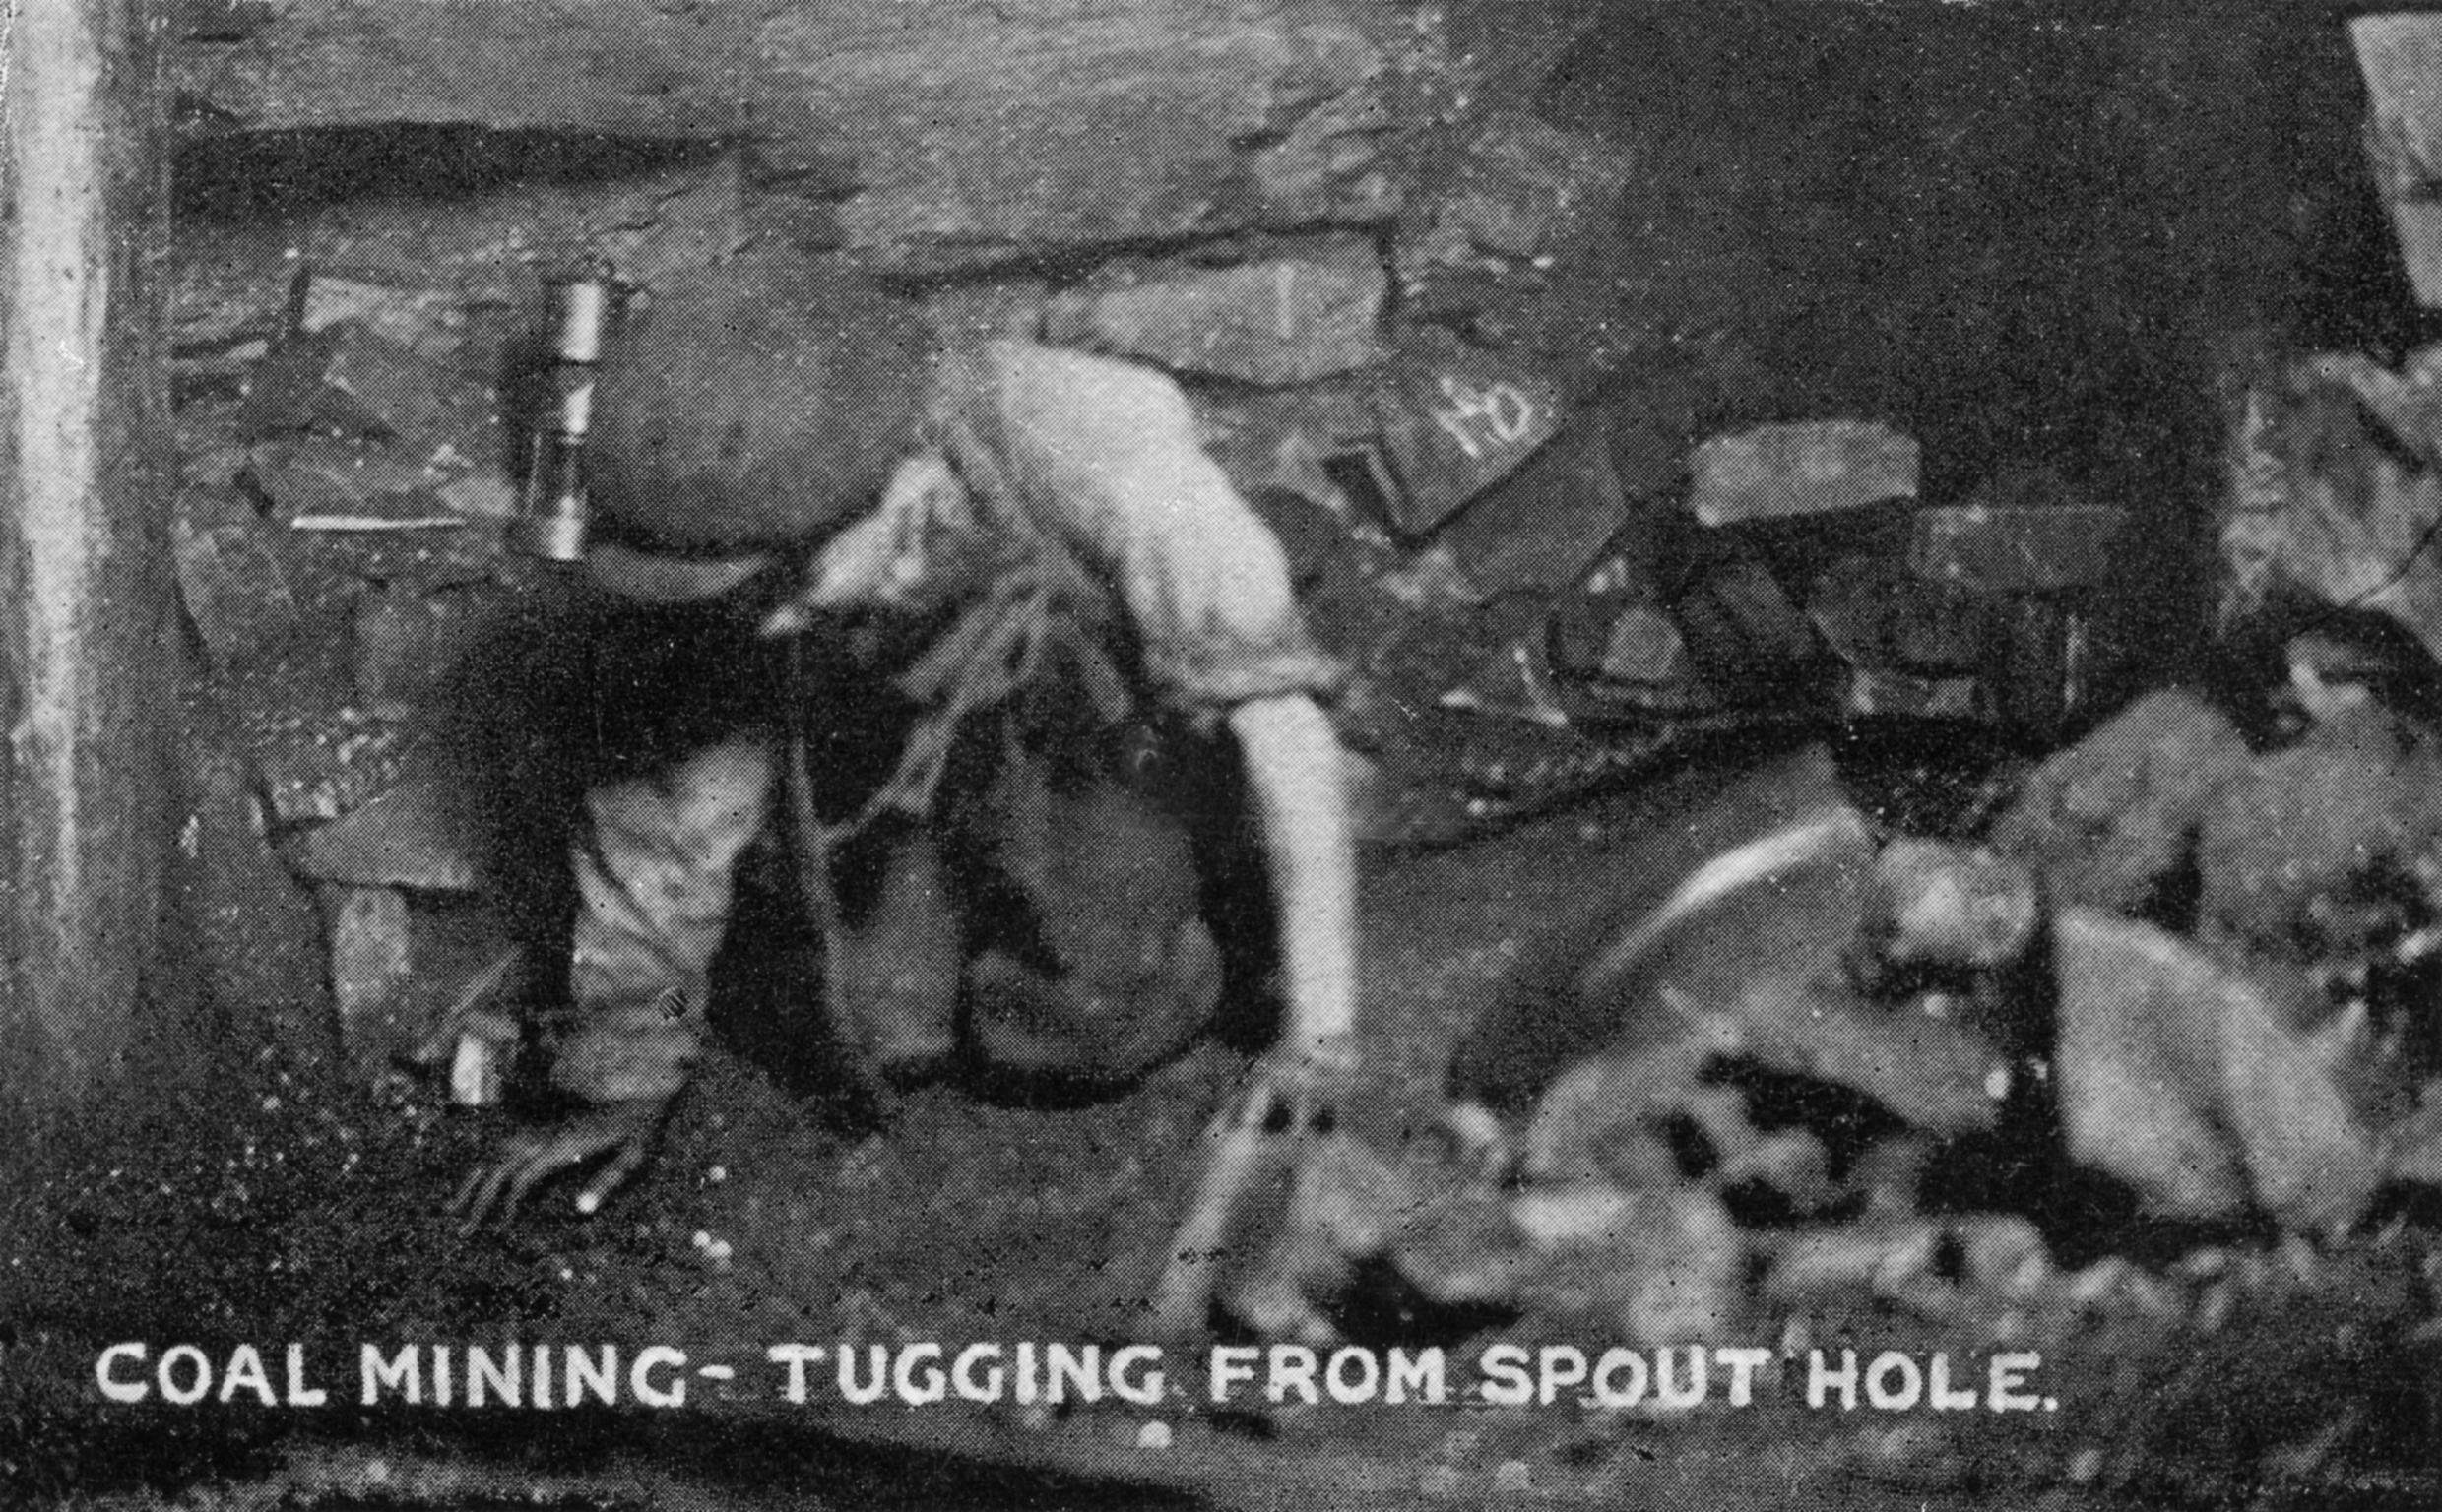 Coal Mining-Tugging from Spout Hole (postcard)